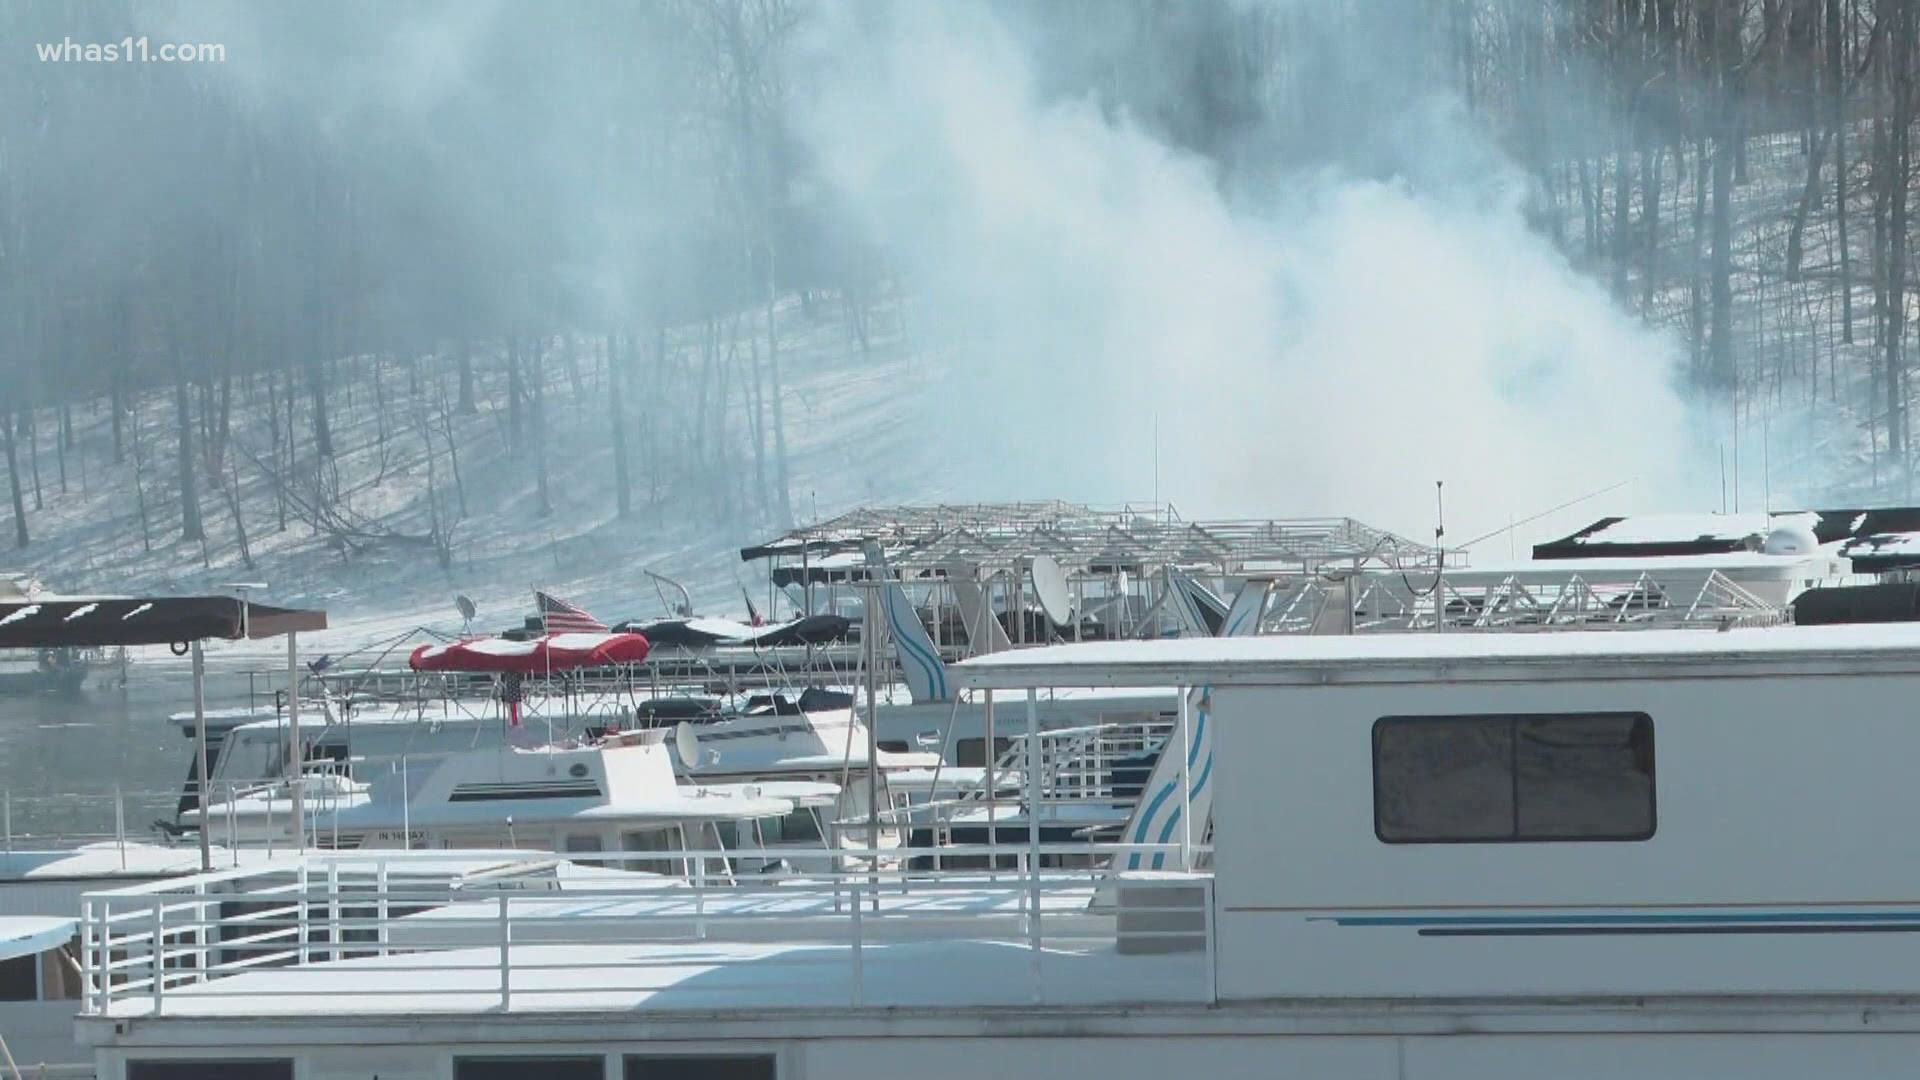 Investigators said at least seven of the eleven boats that were destroyed have now sunk. The fire broke out Friday morning on Patoka Lake in Dubois County.